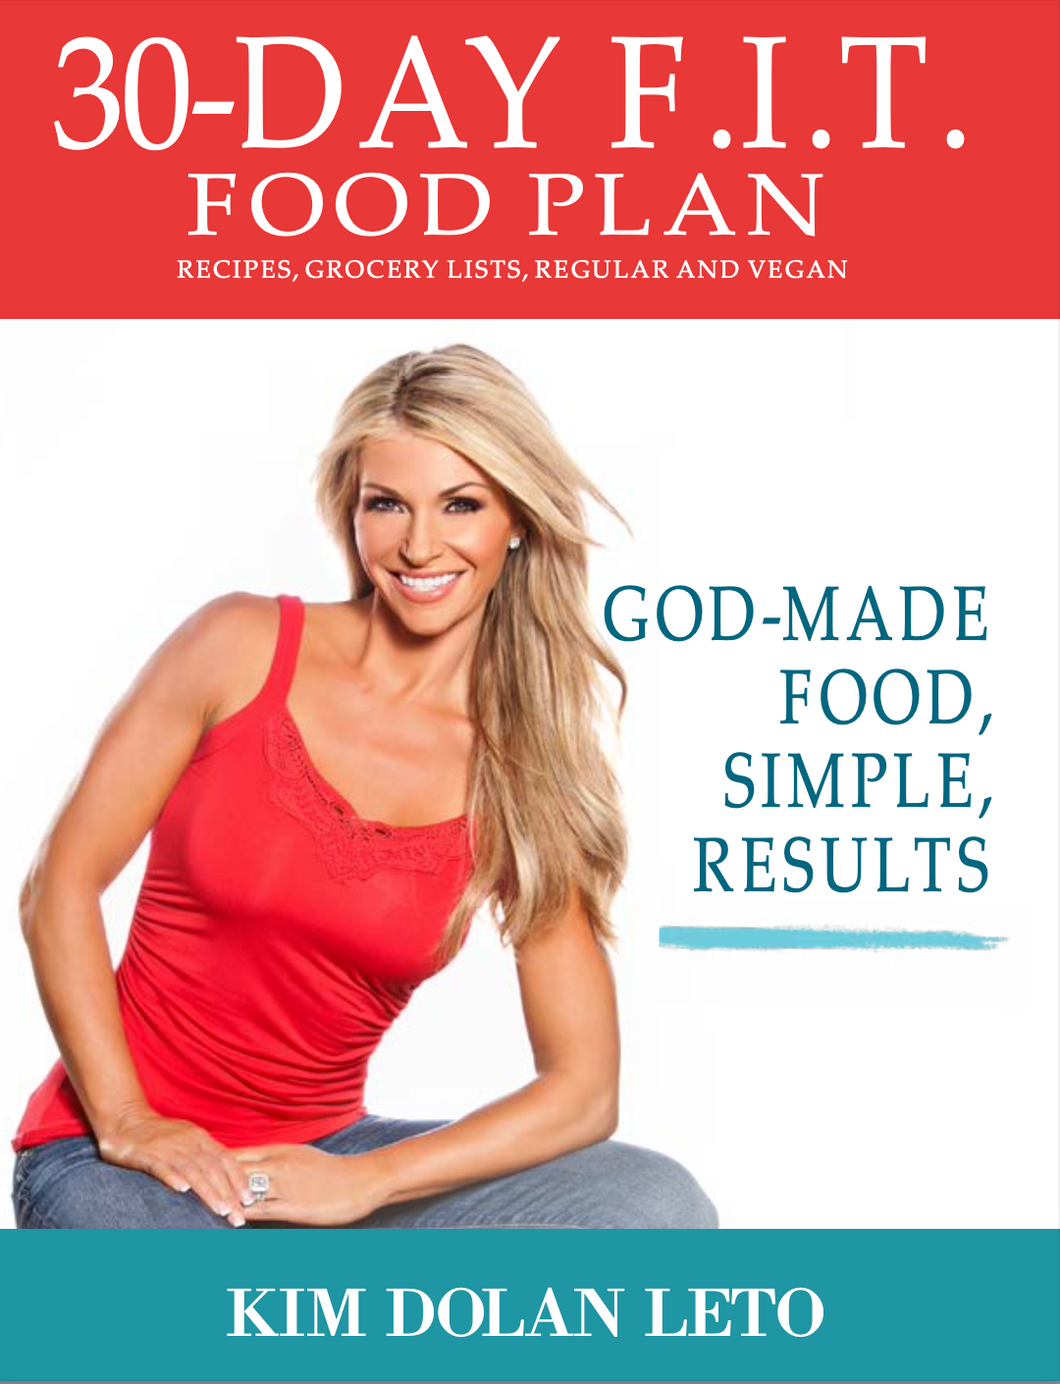 30 Day F.I.T. Food Plan: God-Made, Simple, Results Ebook